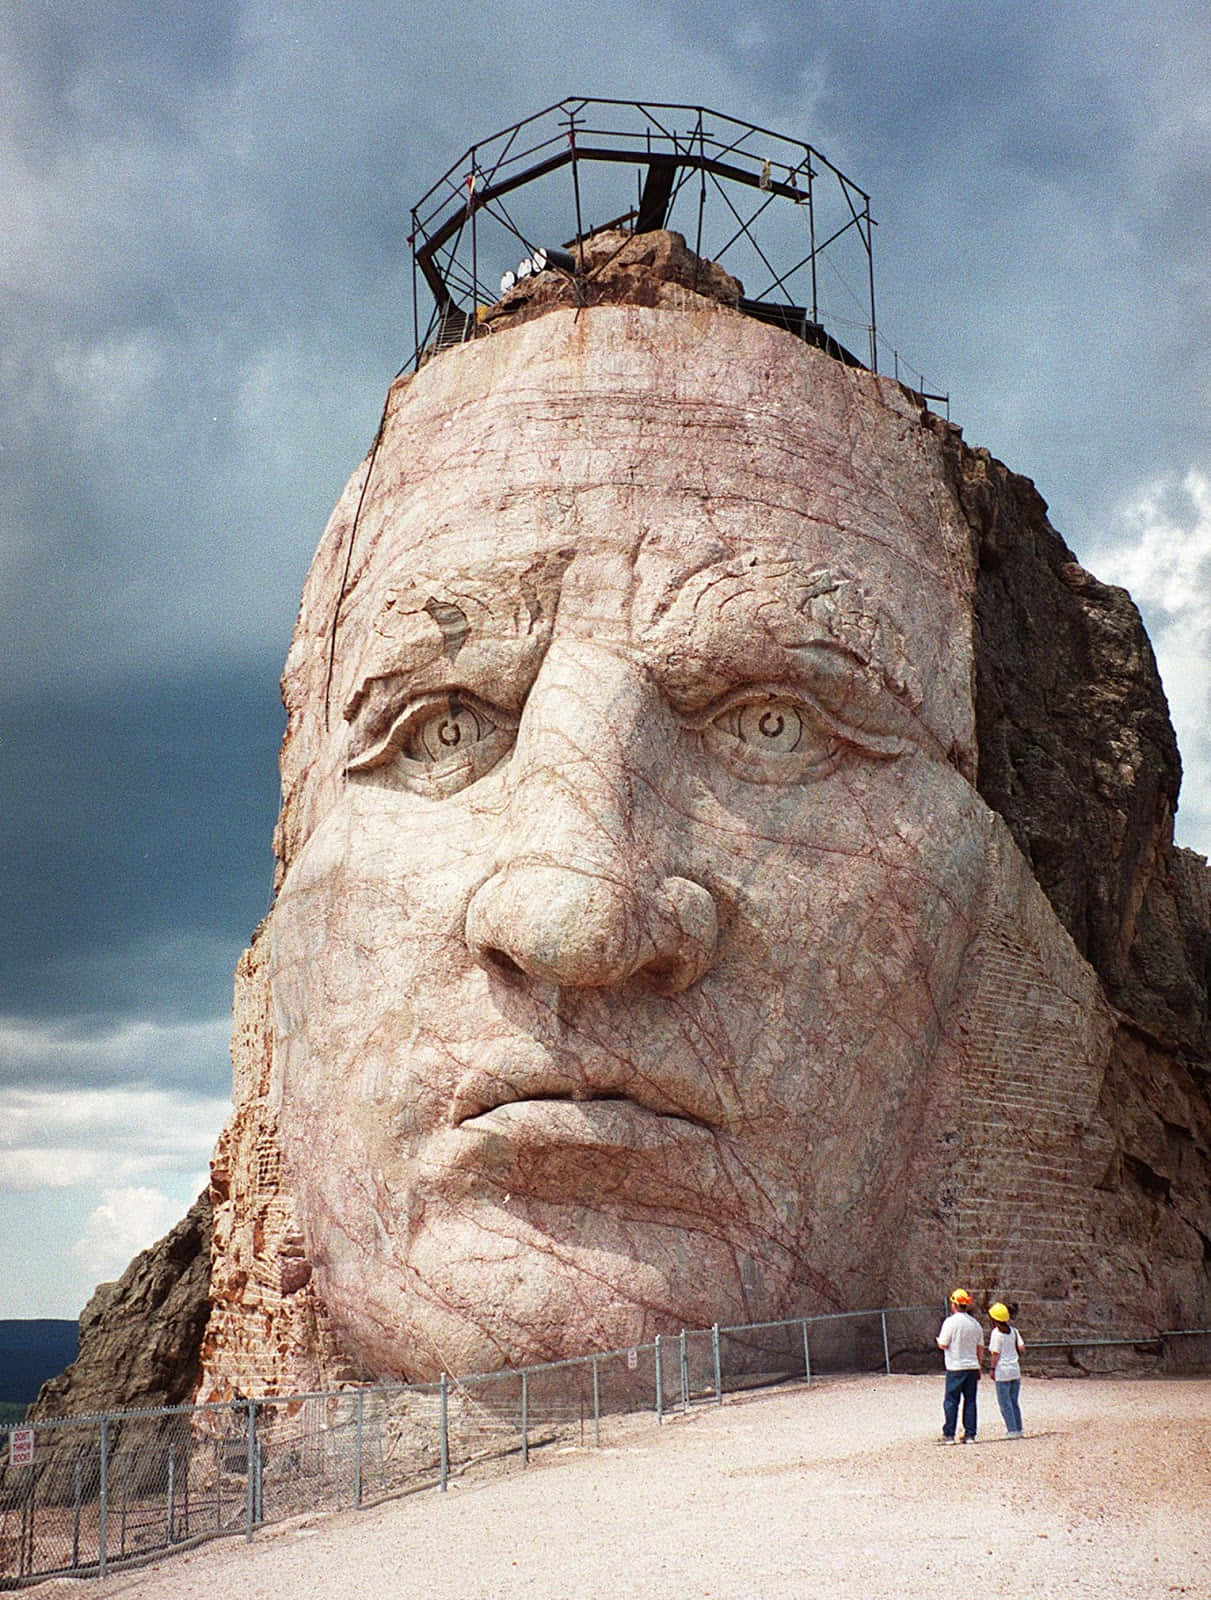 A Large Statue Of A Man On A Rock